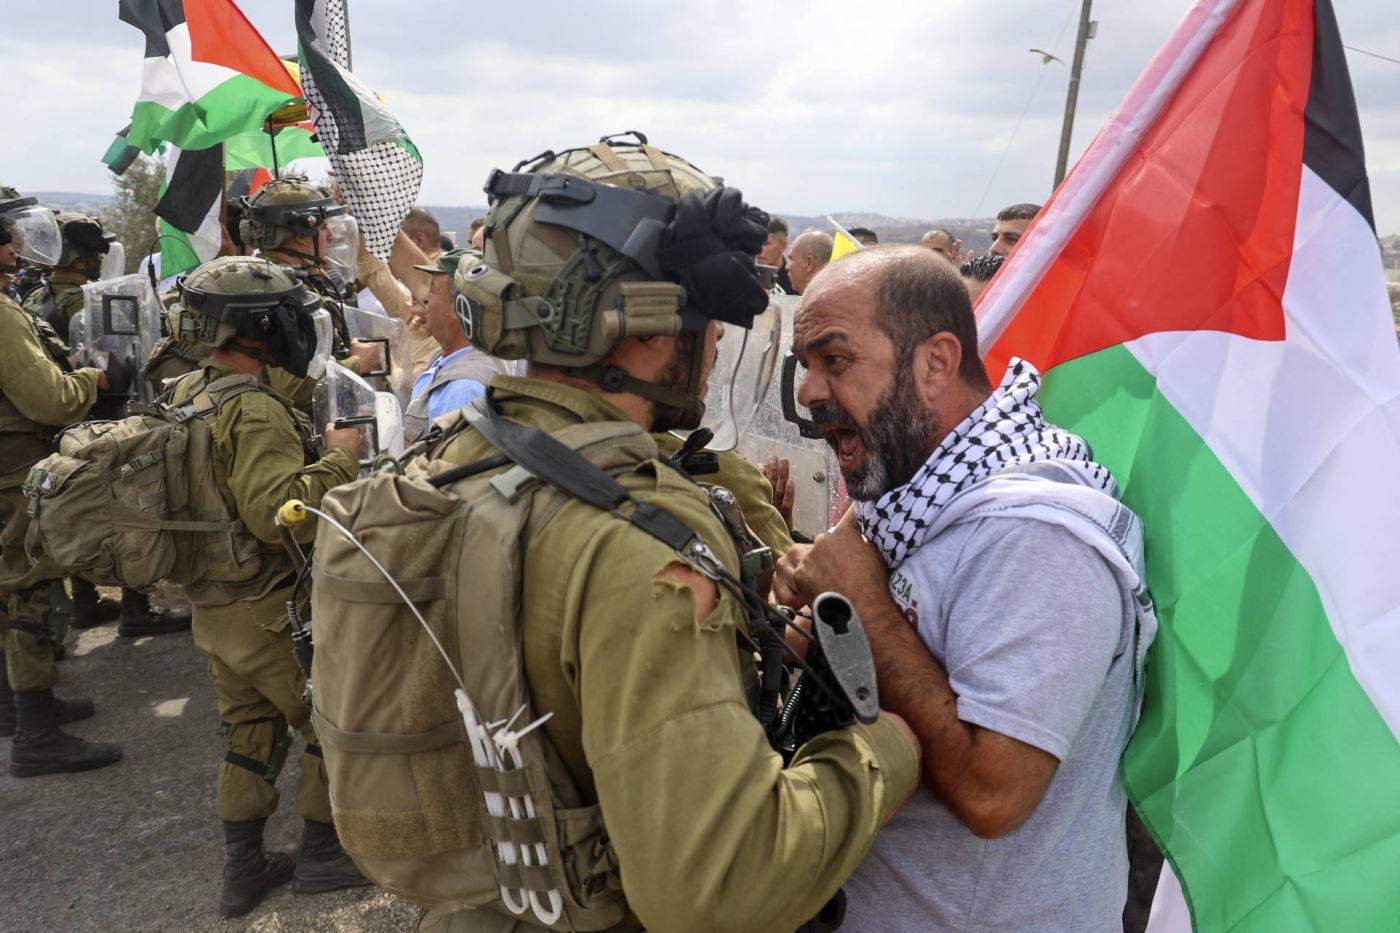 A Palestinian demonstrator confronts Israeli security forces during a protest against the expropriation of Palestinian land by Israel in the village of Kfar Qaddum on October 7, 2022 (AFP)